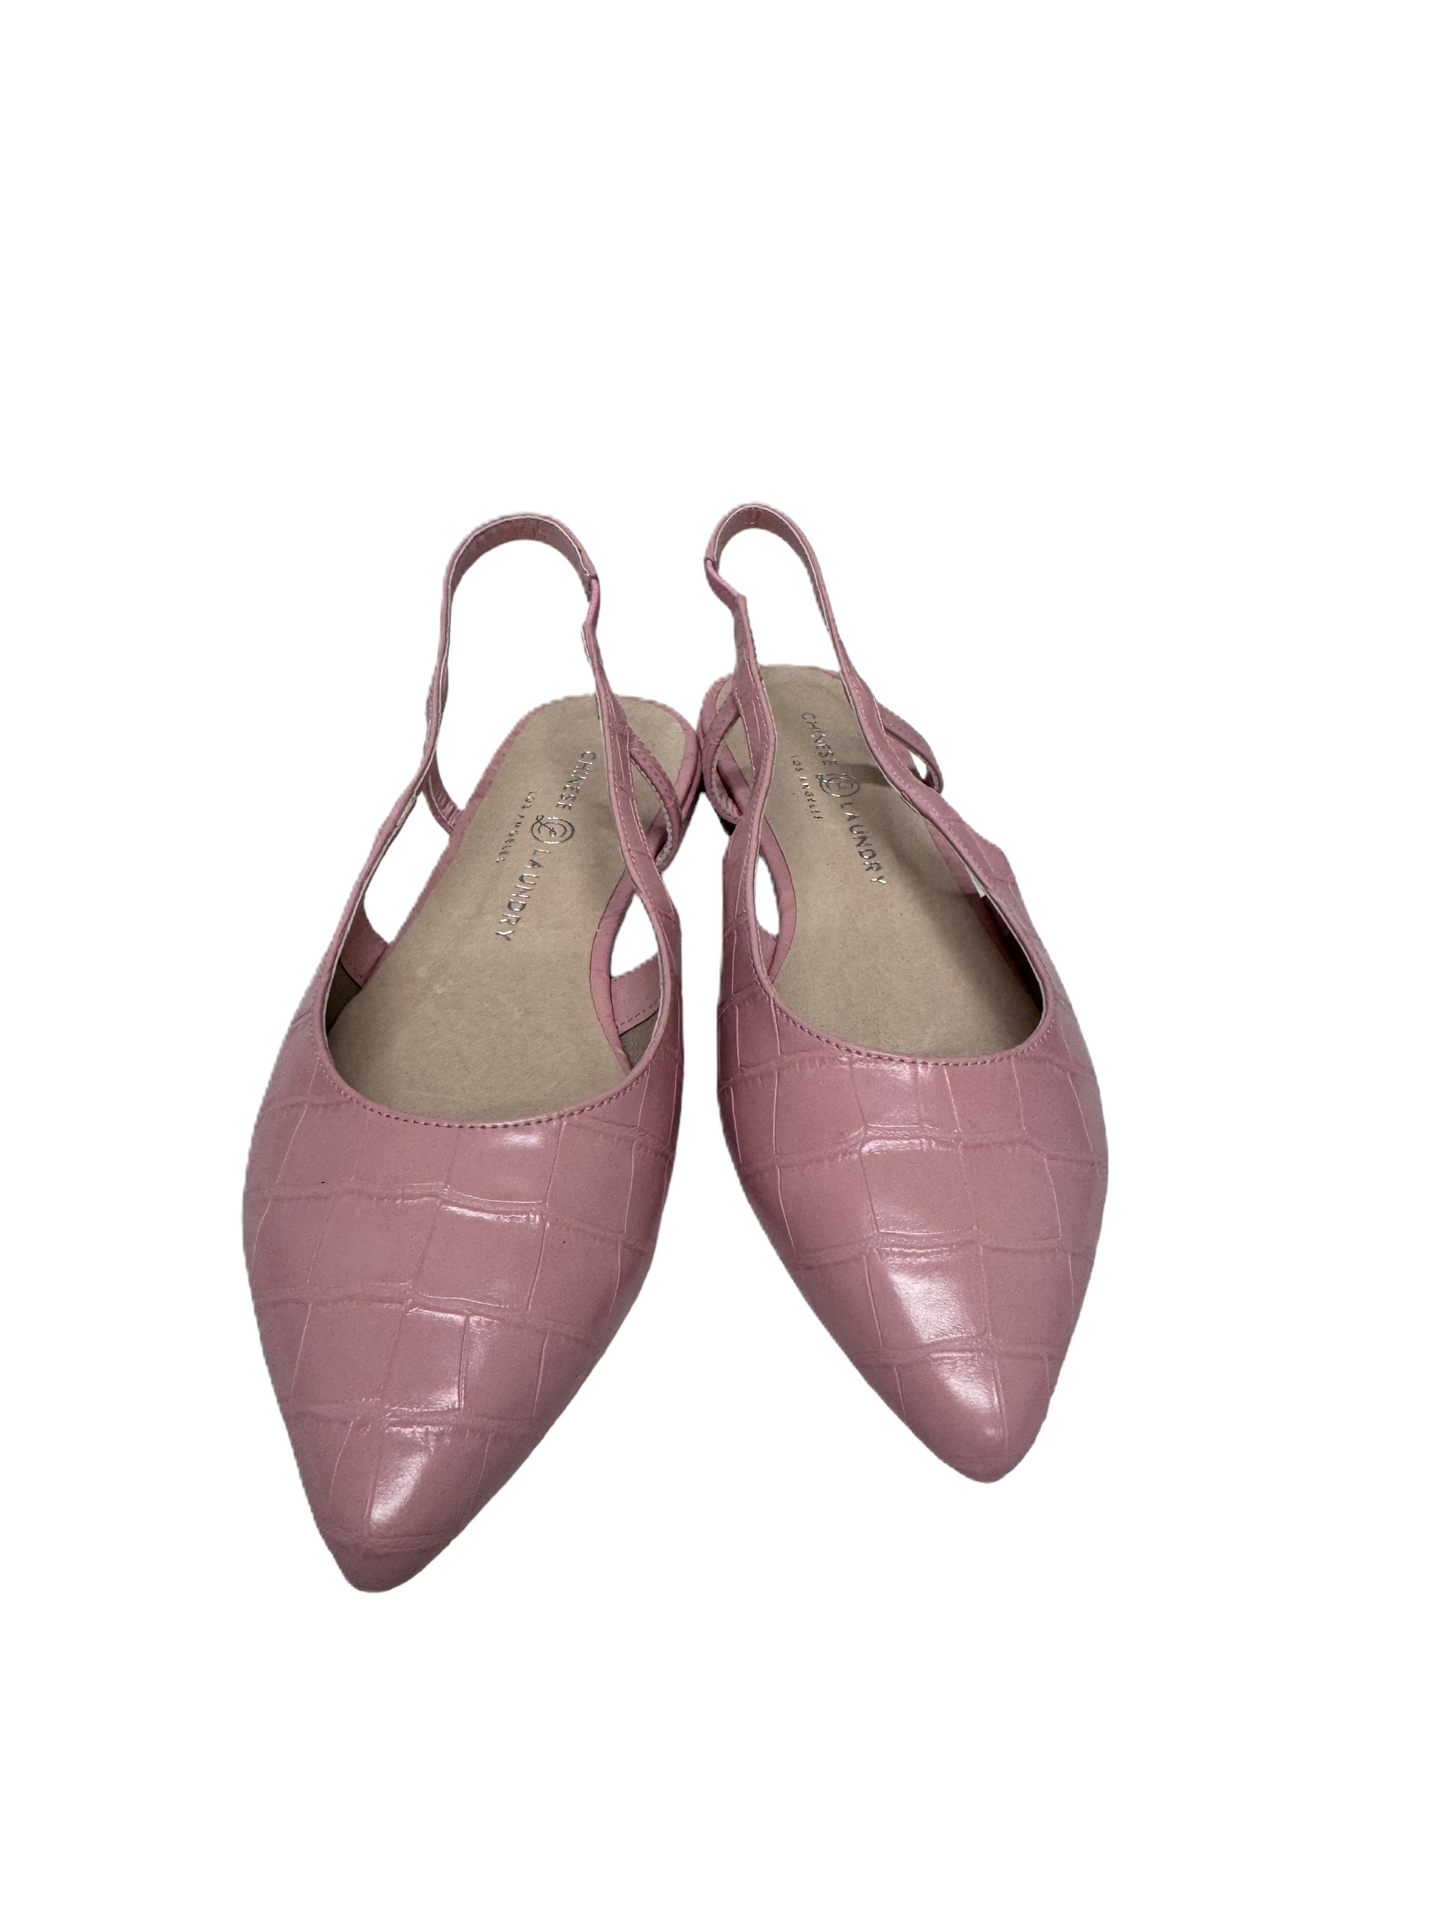 Pink Shoes Flats By Chinese Laundry, Size: 8